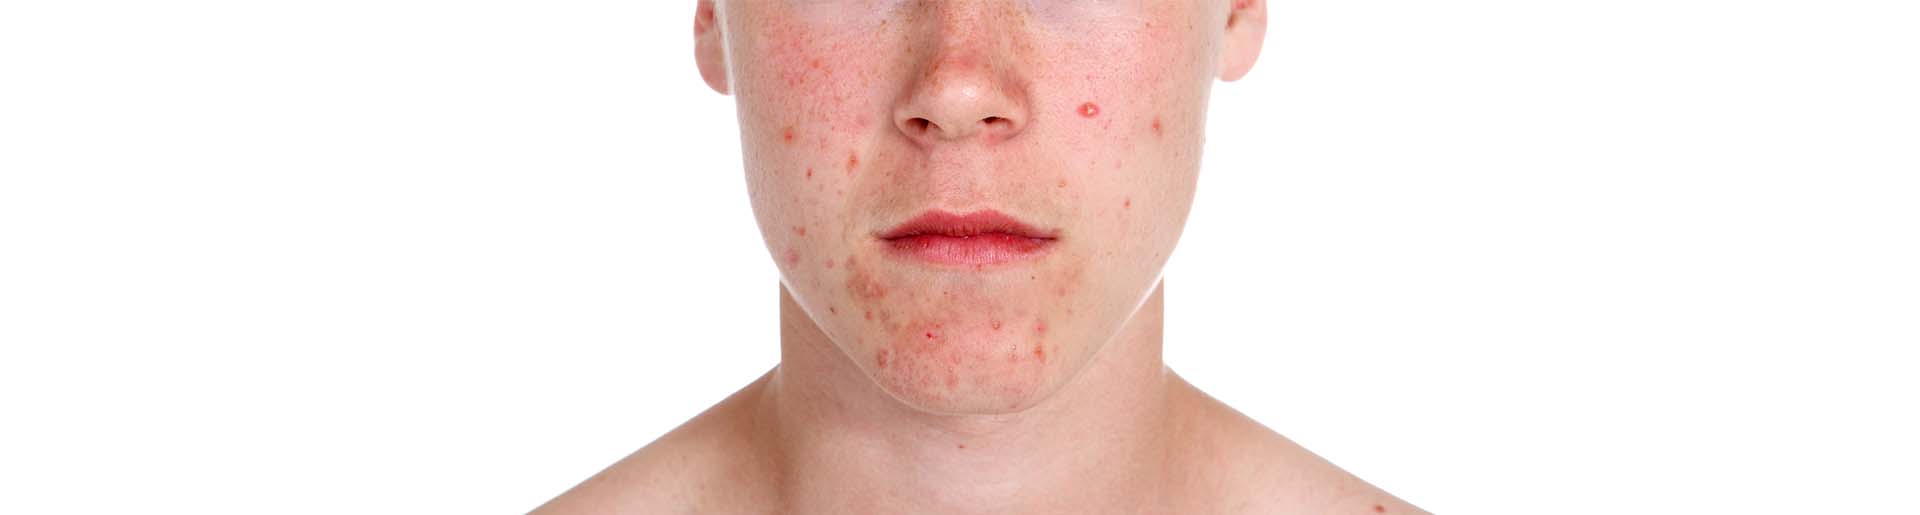 Cystic acne treatments at Essential Aesthetics in Danville CA